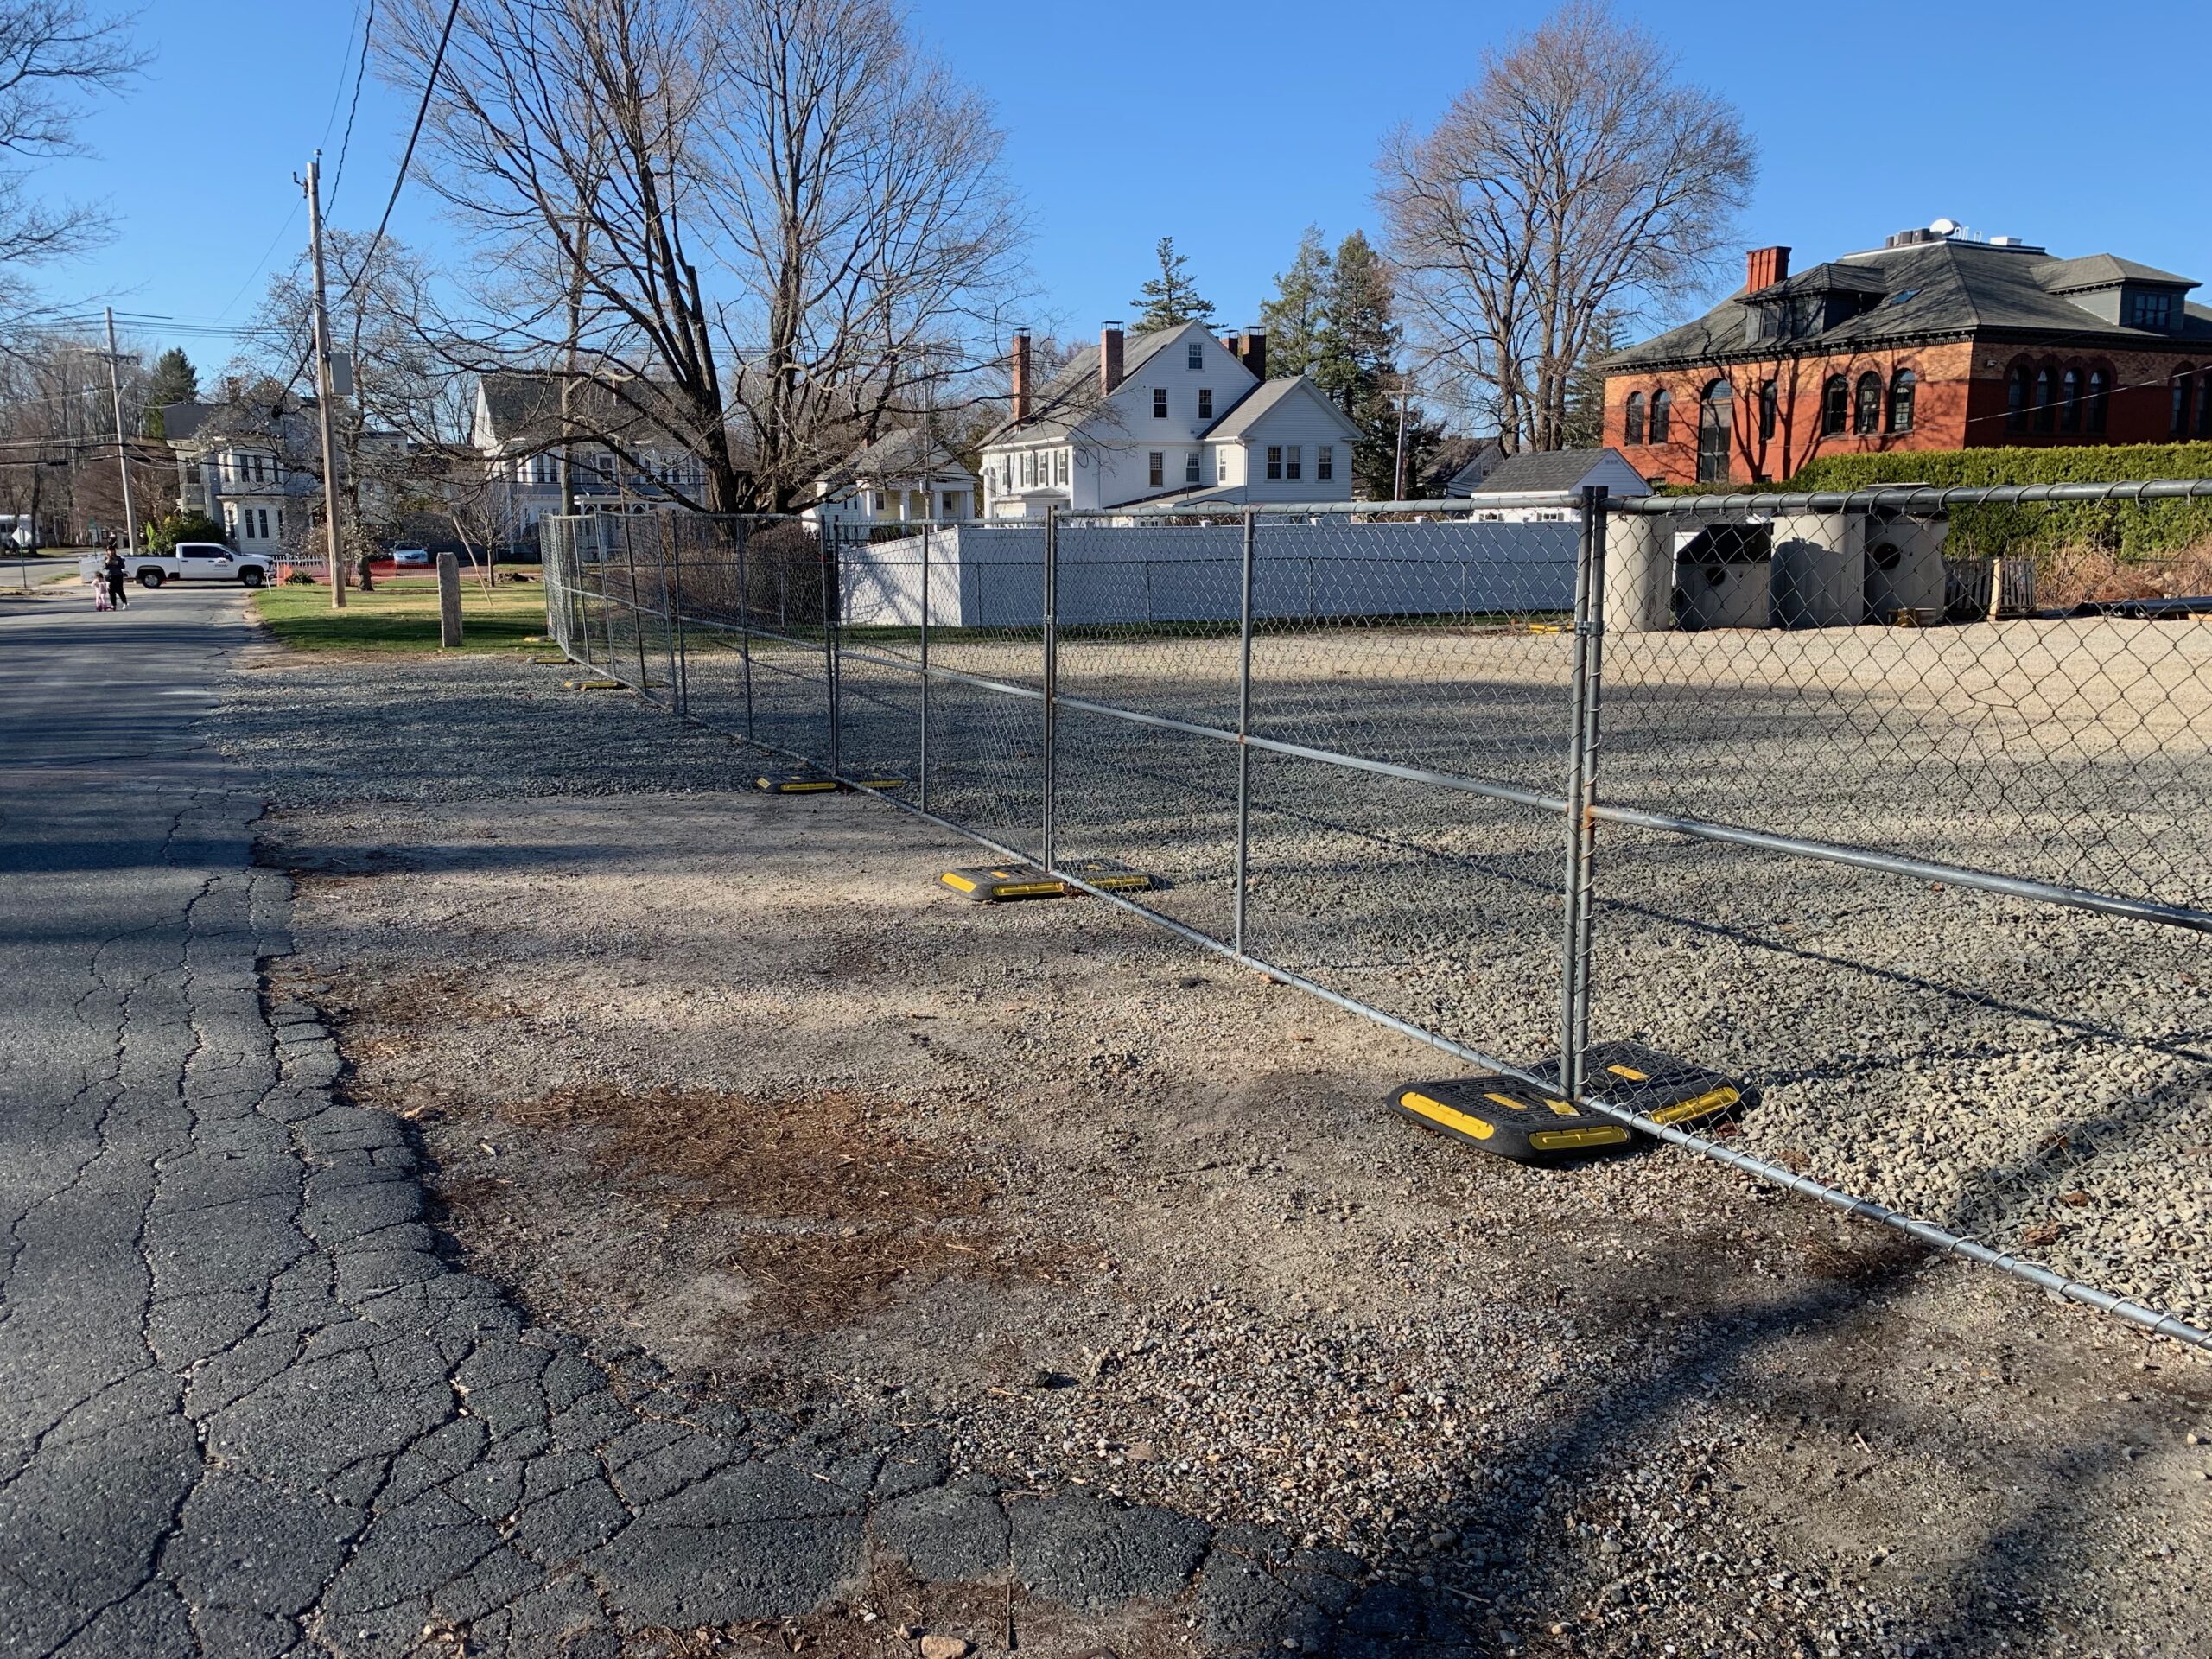 Parks & Rec seeks to clarify jurisdictional issues regarding Marshall Ave. construction staging